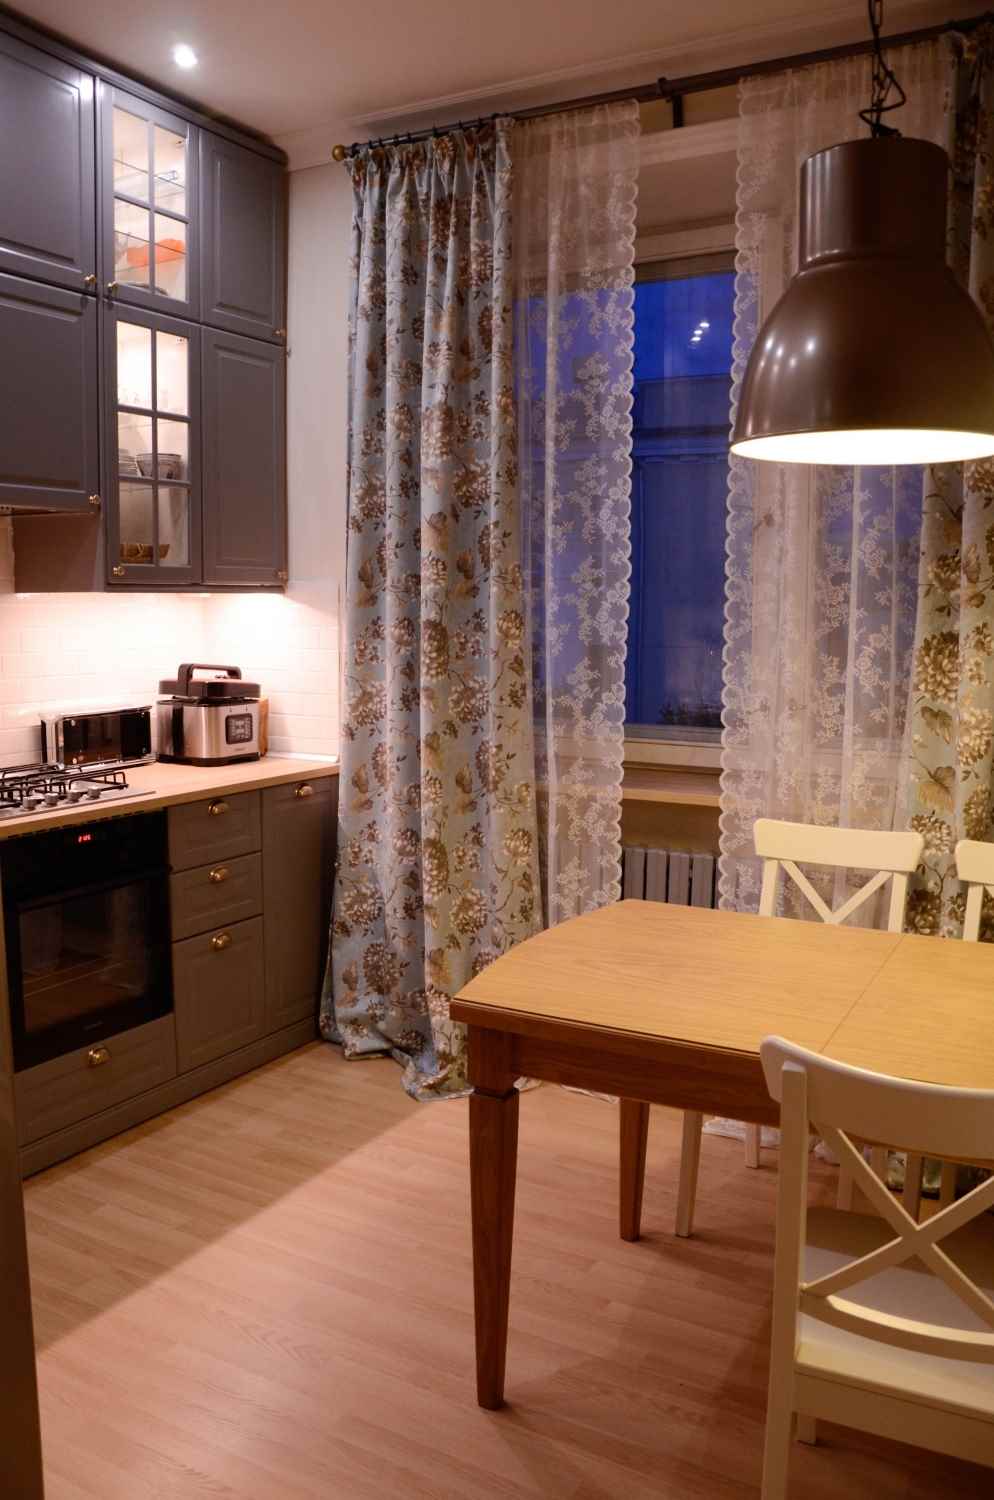 An example of a bright style kitchen 10 sq.m. n series 44